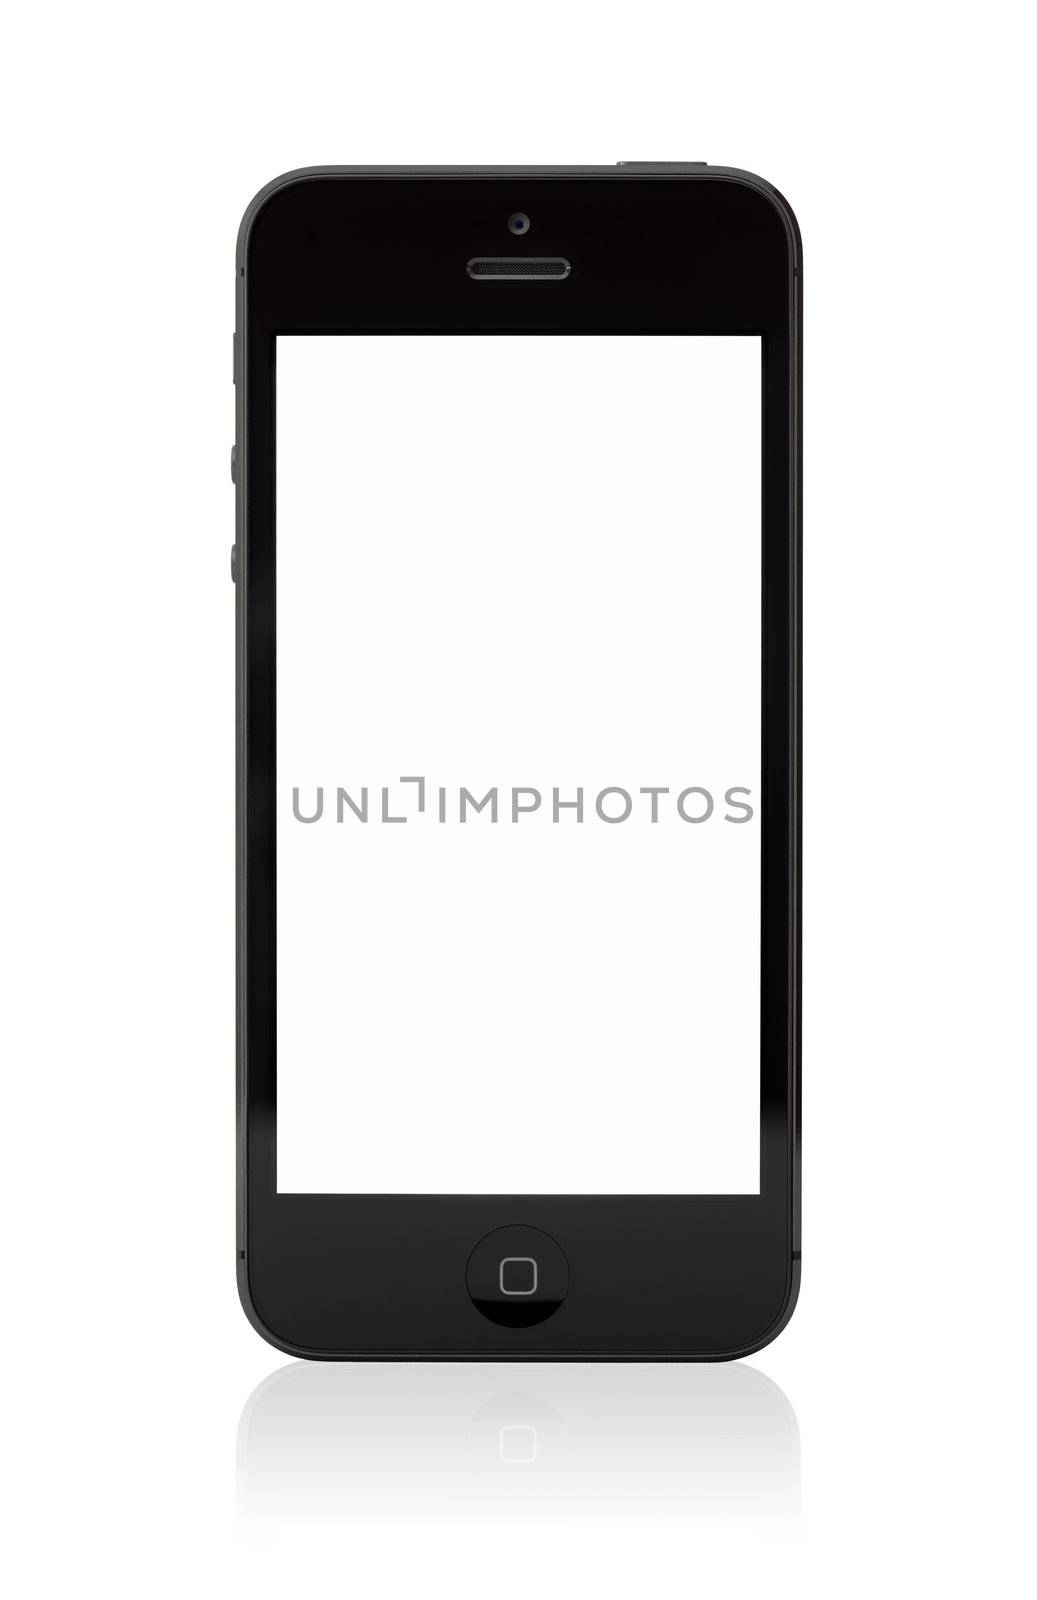 Kiev, Ukraine - January 9, 2013: The new black Apple iPhone 5, sixth generation version of the iPhone is slimmer and lighter model with new high-resolution, 4-inch screen display.